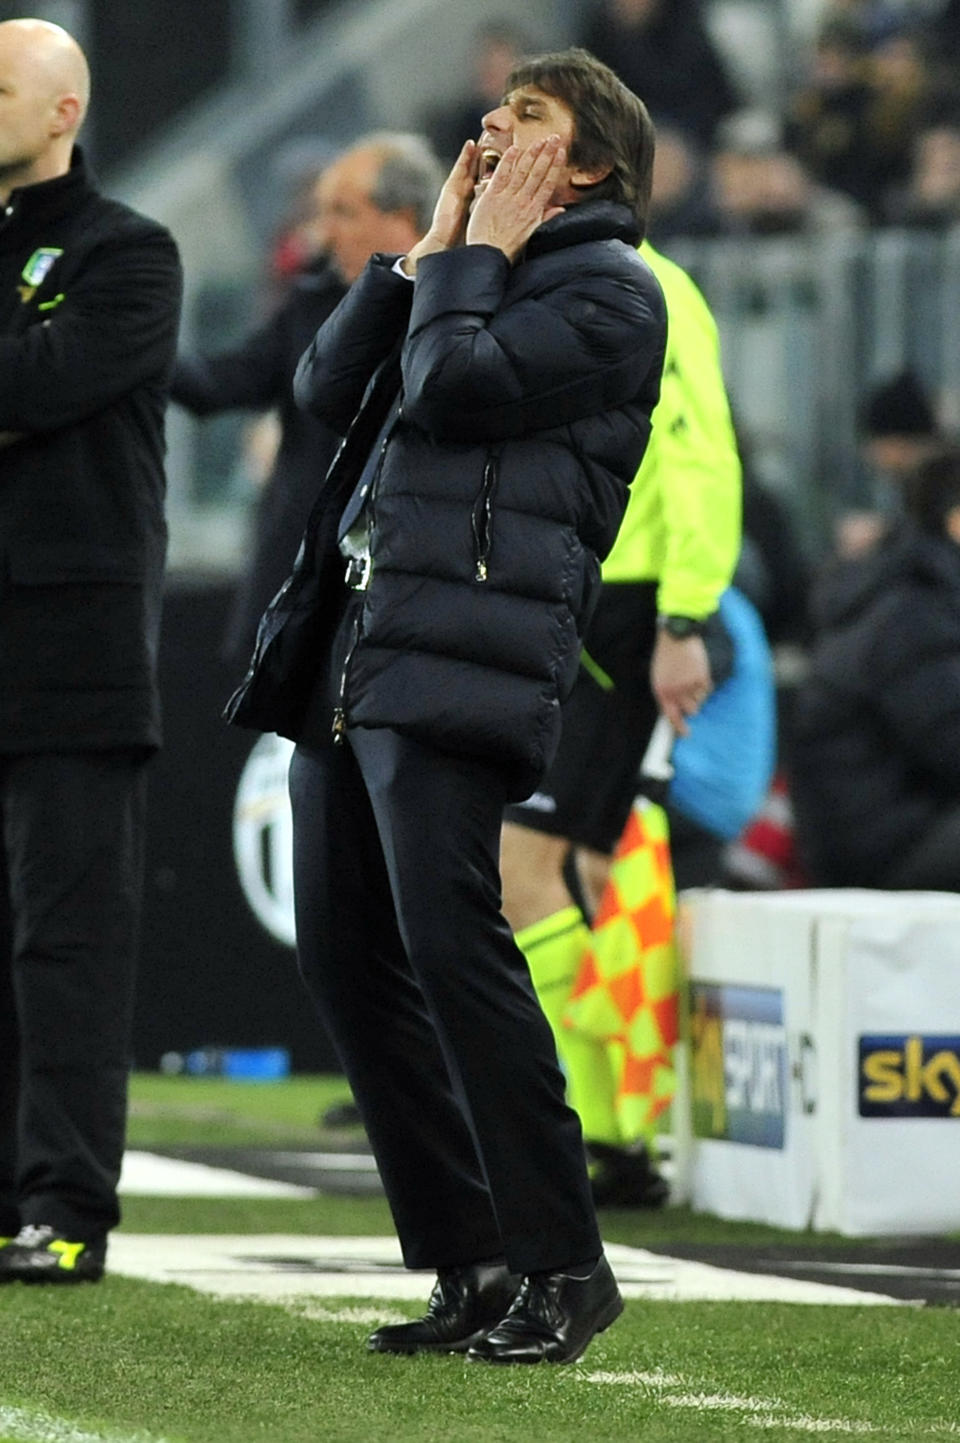 Juventus coach Antonio Conte shouts to his players during a Serie A soccer match between Juventus and Torino at the Juventus stadium, in Turin, Italy, Sunday, Feb. 23, 2014. (AP Photo/Massimo Pinca)